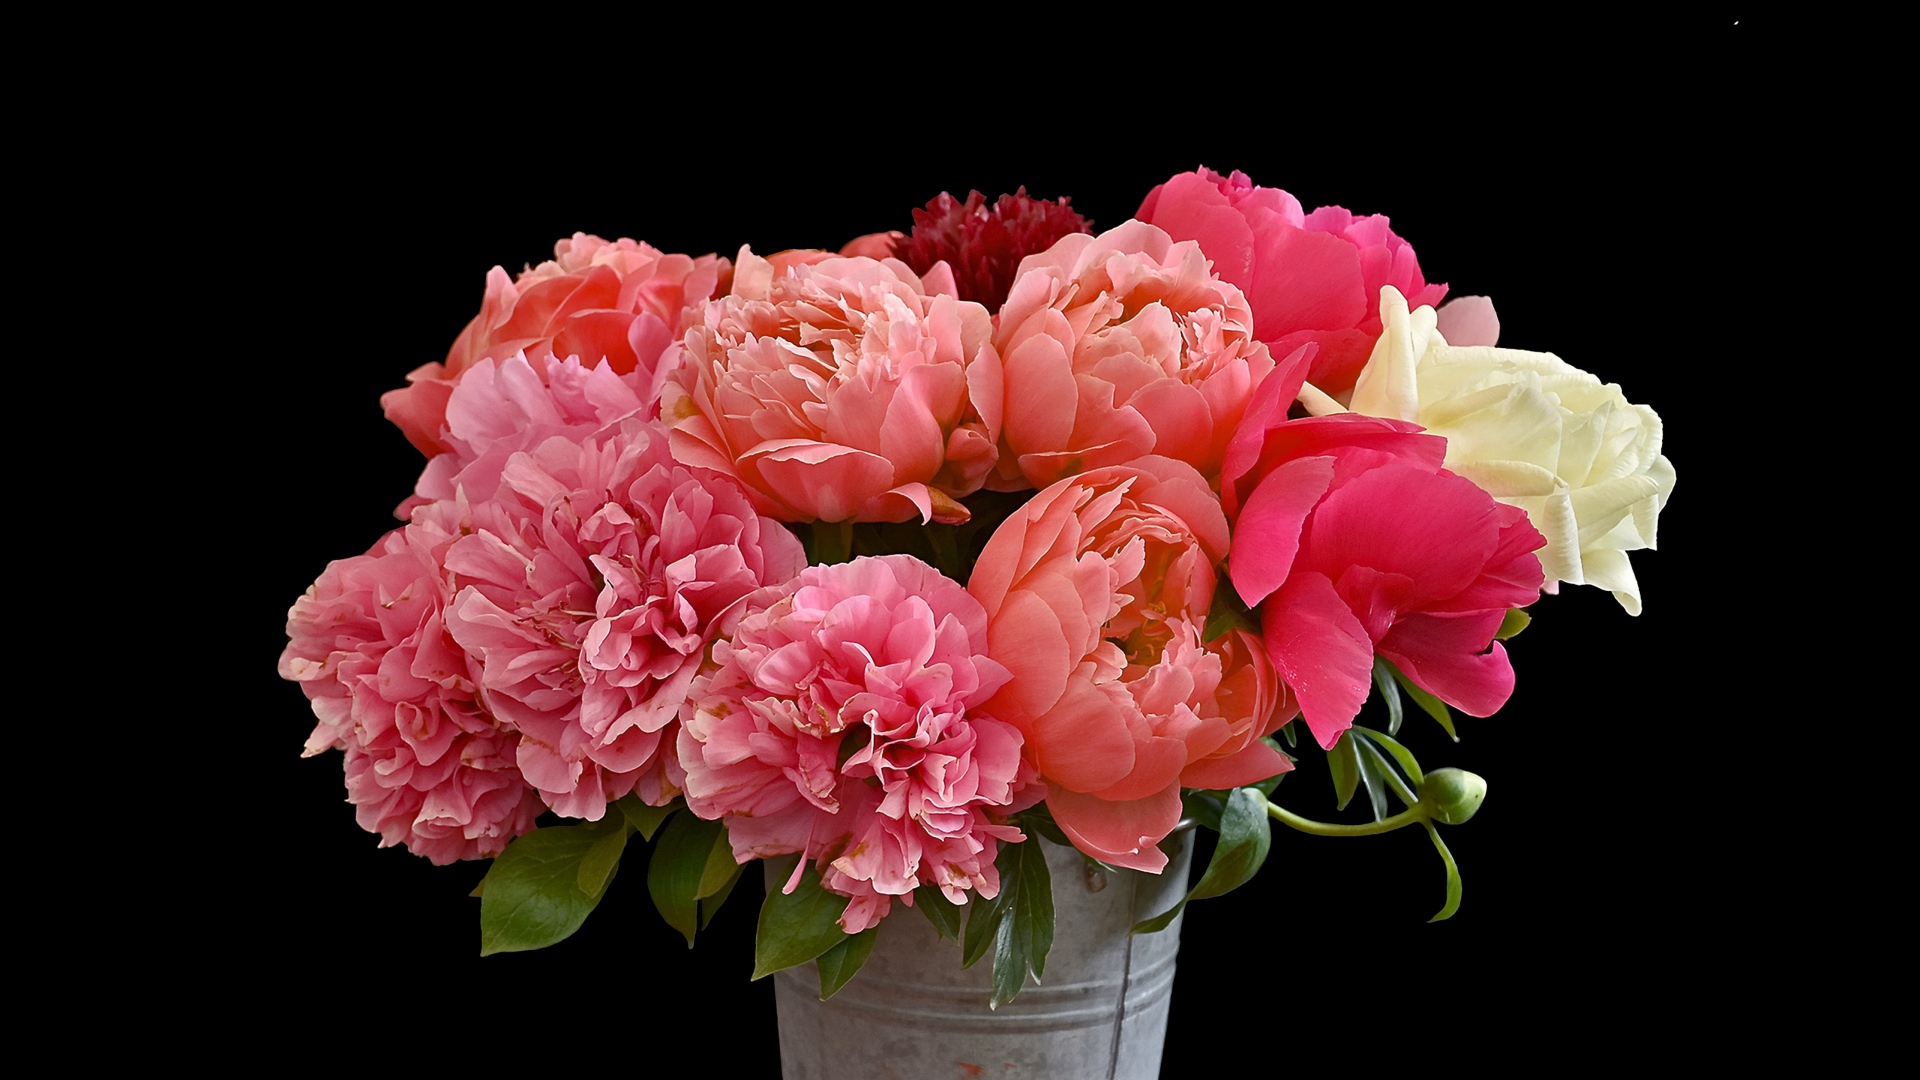 Bouquet of pink beautiful pions in a bucket on a black background